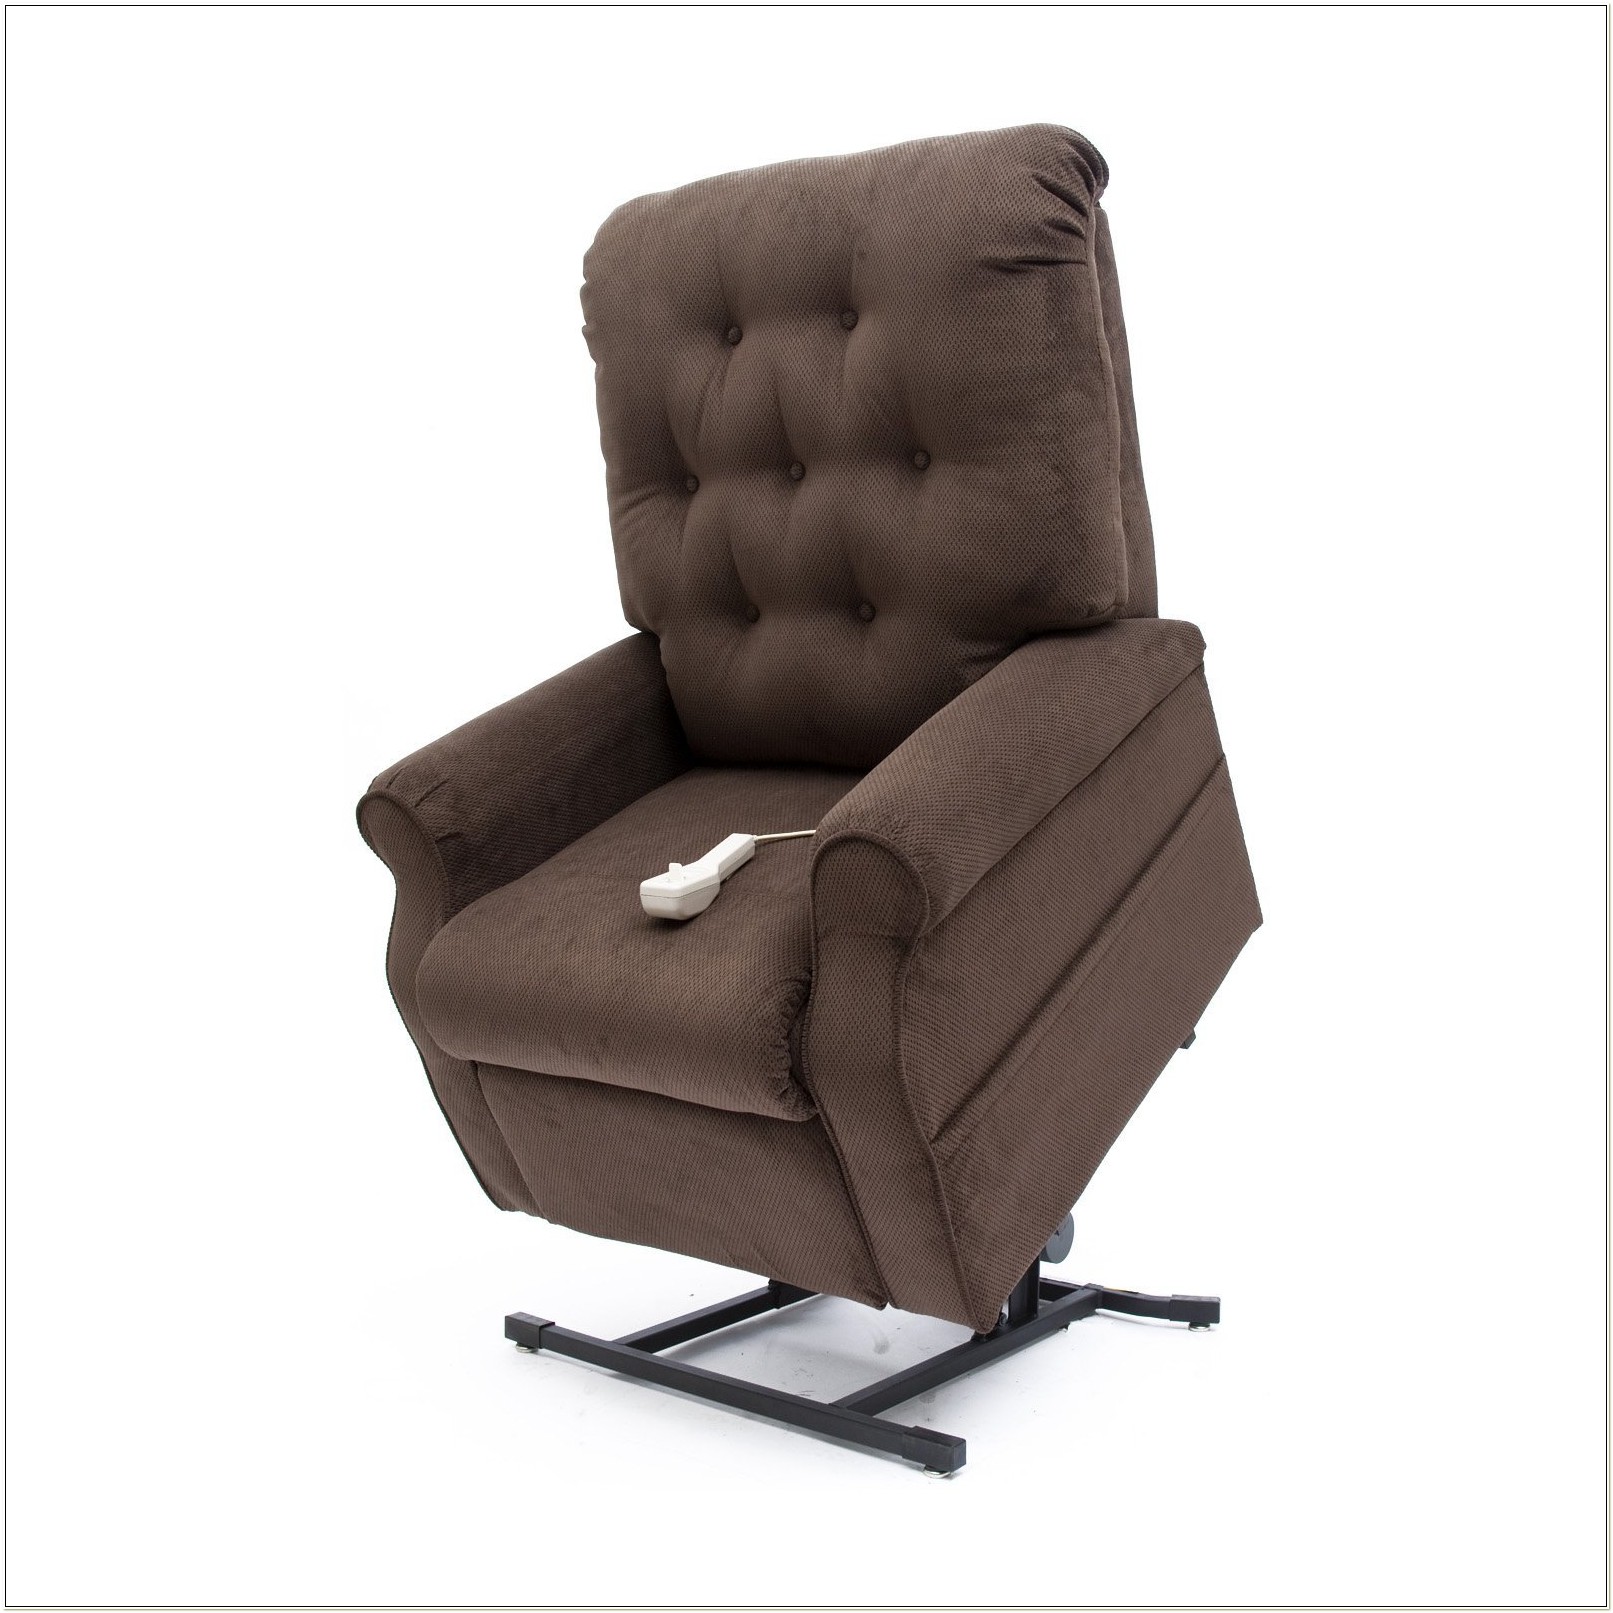 Wall Hugger Lift Recliner Chairs - Chairs : Home Decorating Ideas #